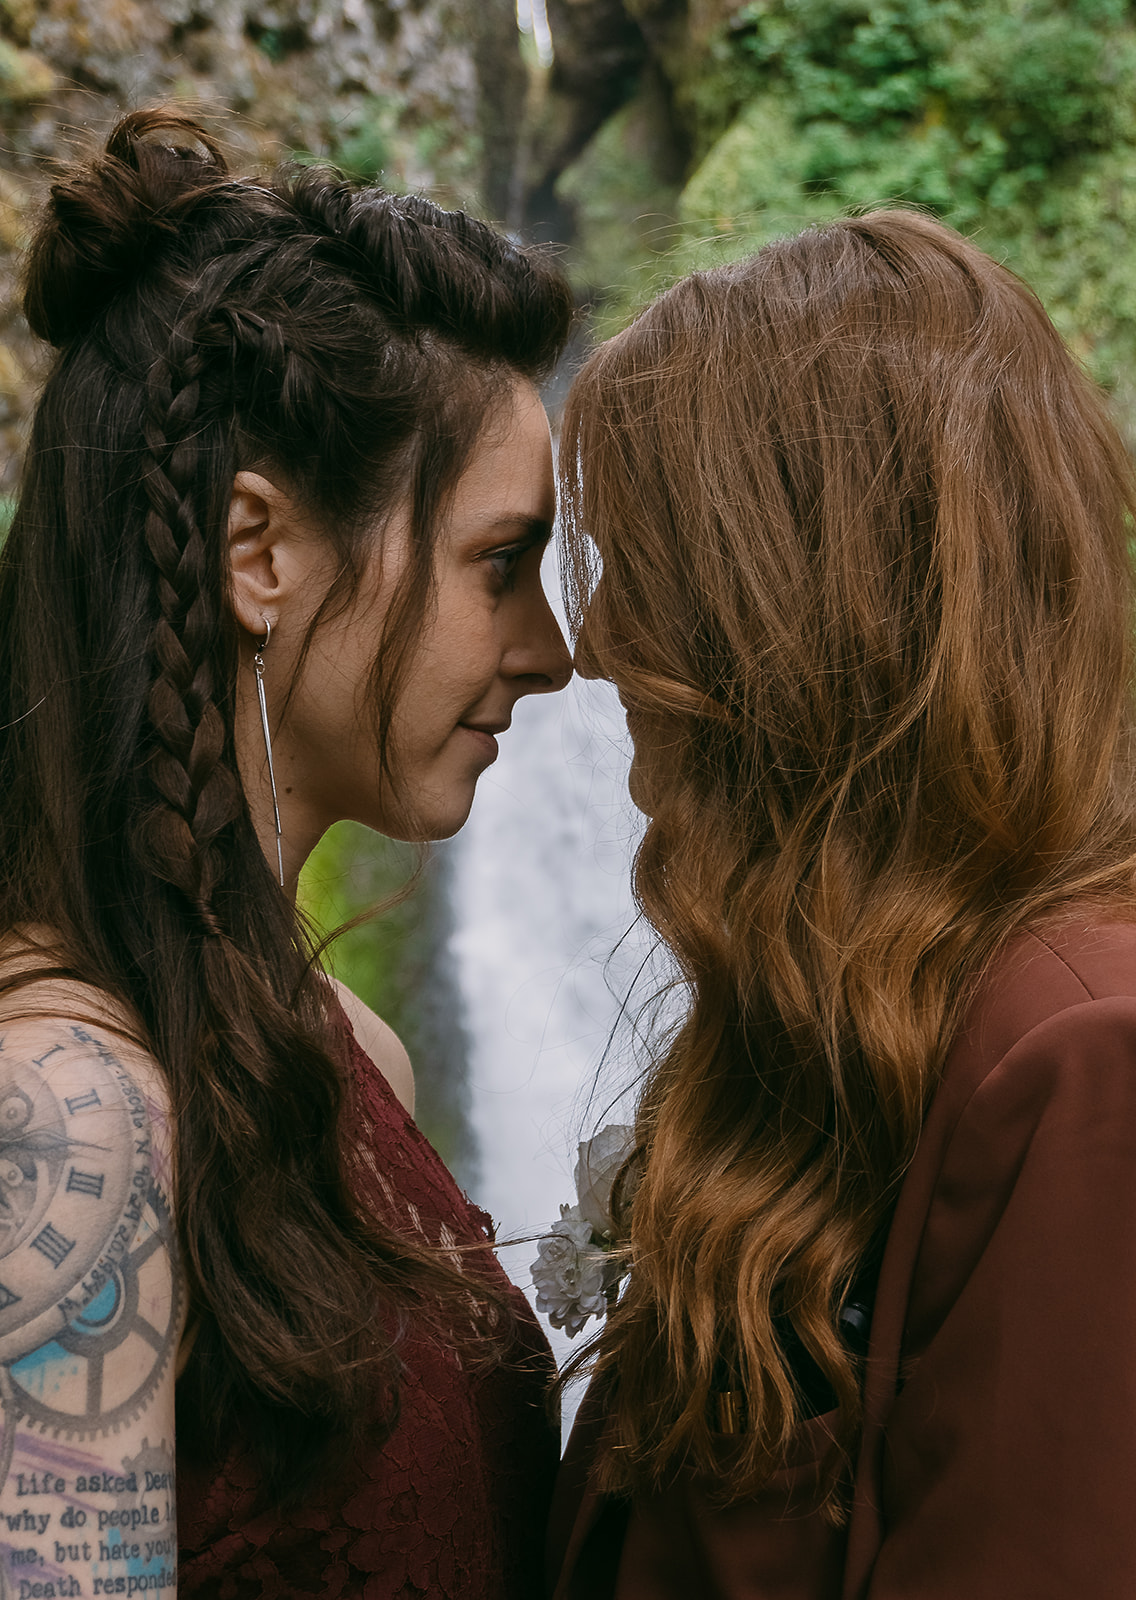 Close up image of two brides looking at each other nose to nose, with the details of their hair featured (one bride has a long braid running down the side of he head, and the other has a long cascade of red curls), in front of a plunging waterfall surrounded by mossy rocks.